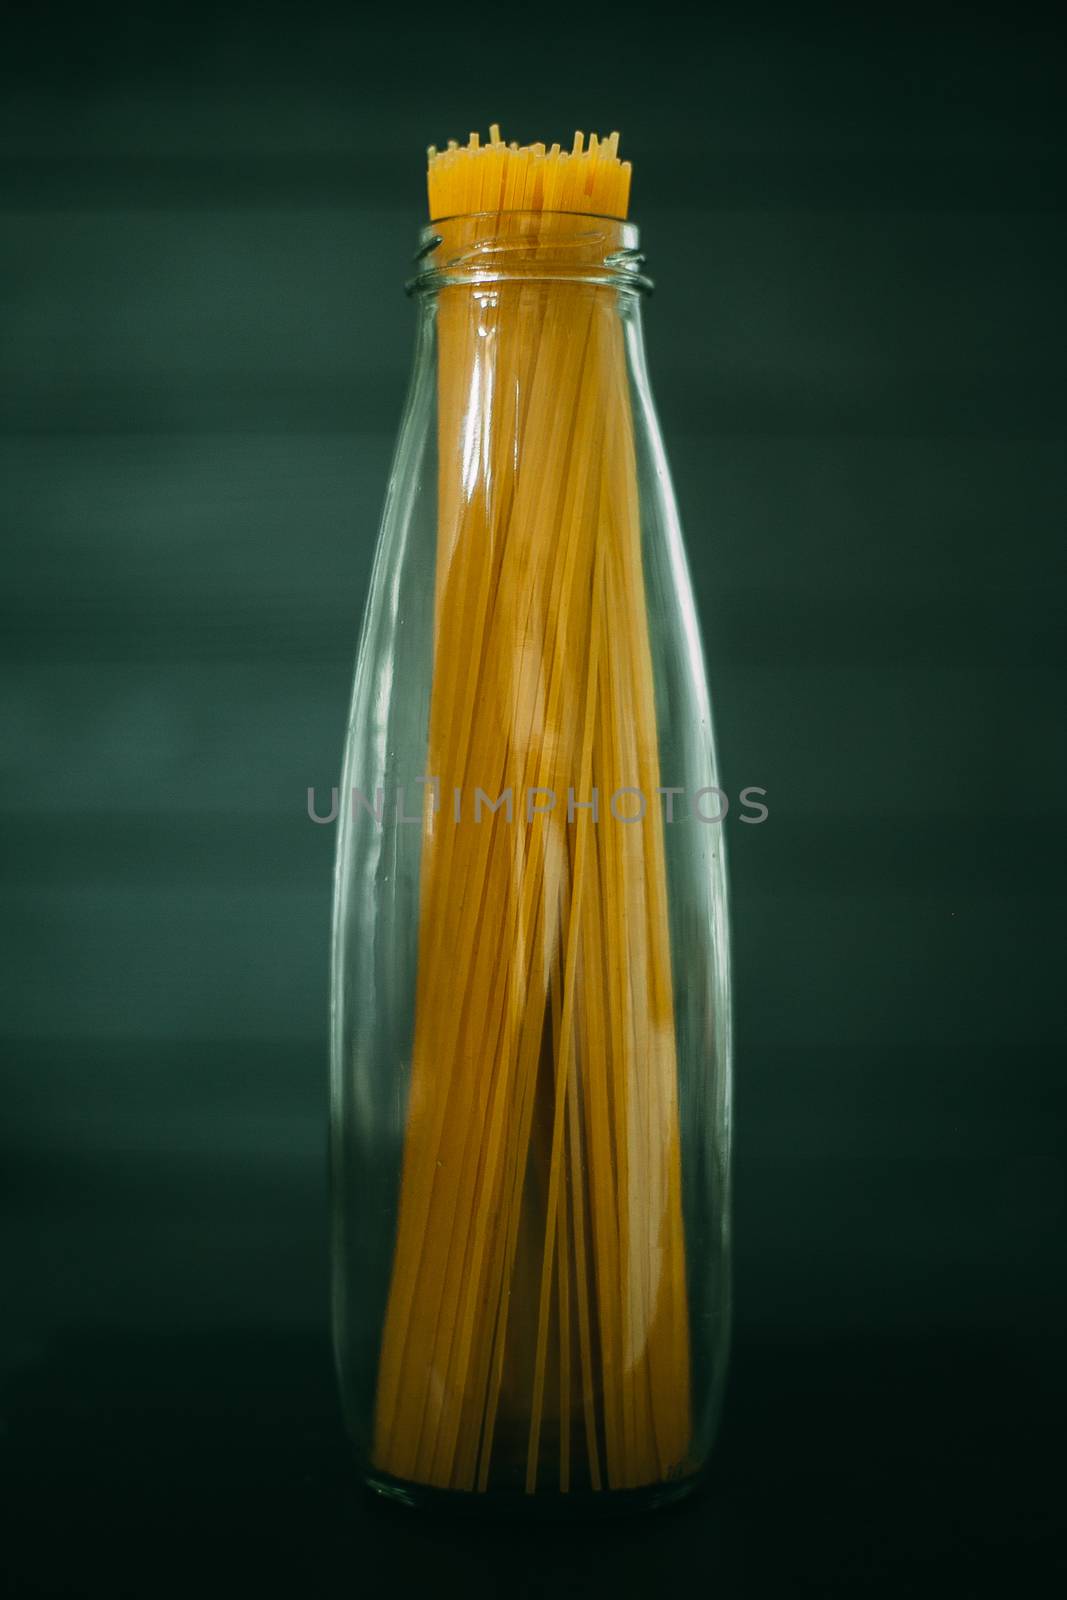 Spaghetti in a glass jar on a white tile background